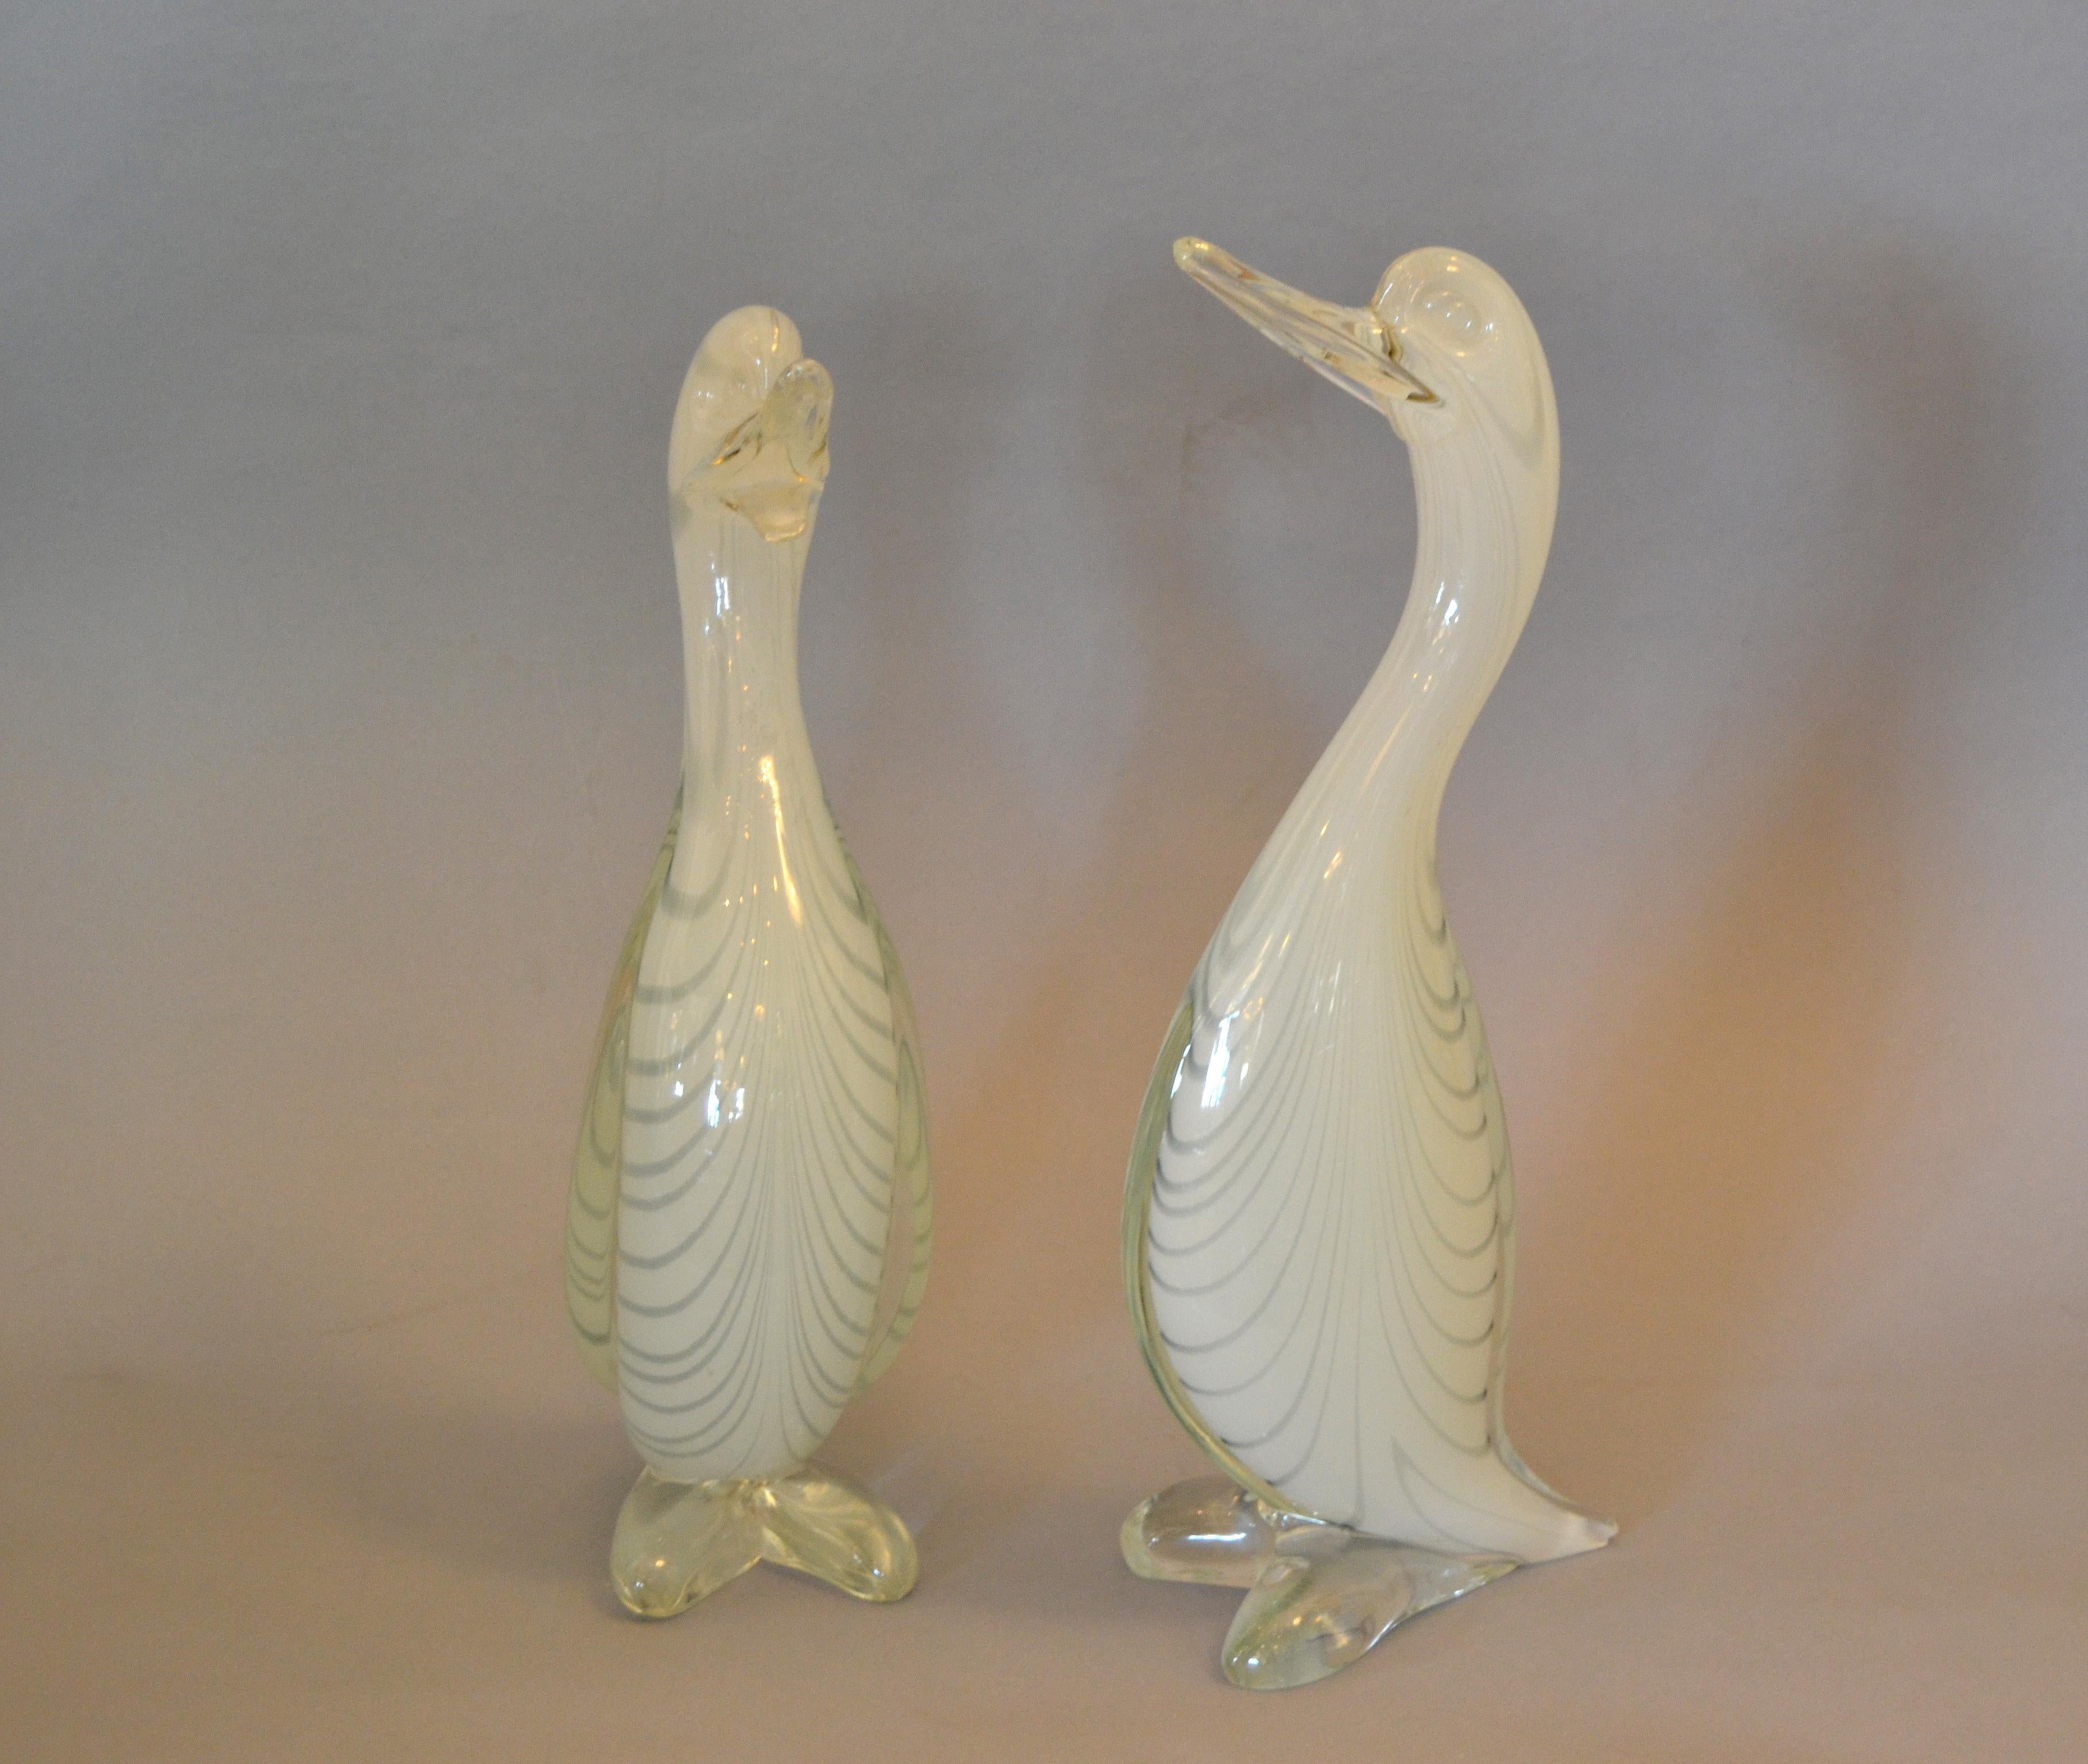 Italian Pair of Stylized Murano Art Glass Ducks Attributed to Archimede Seguso Italy